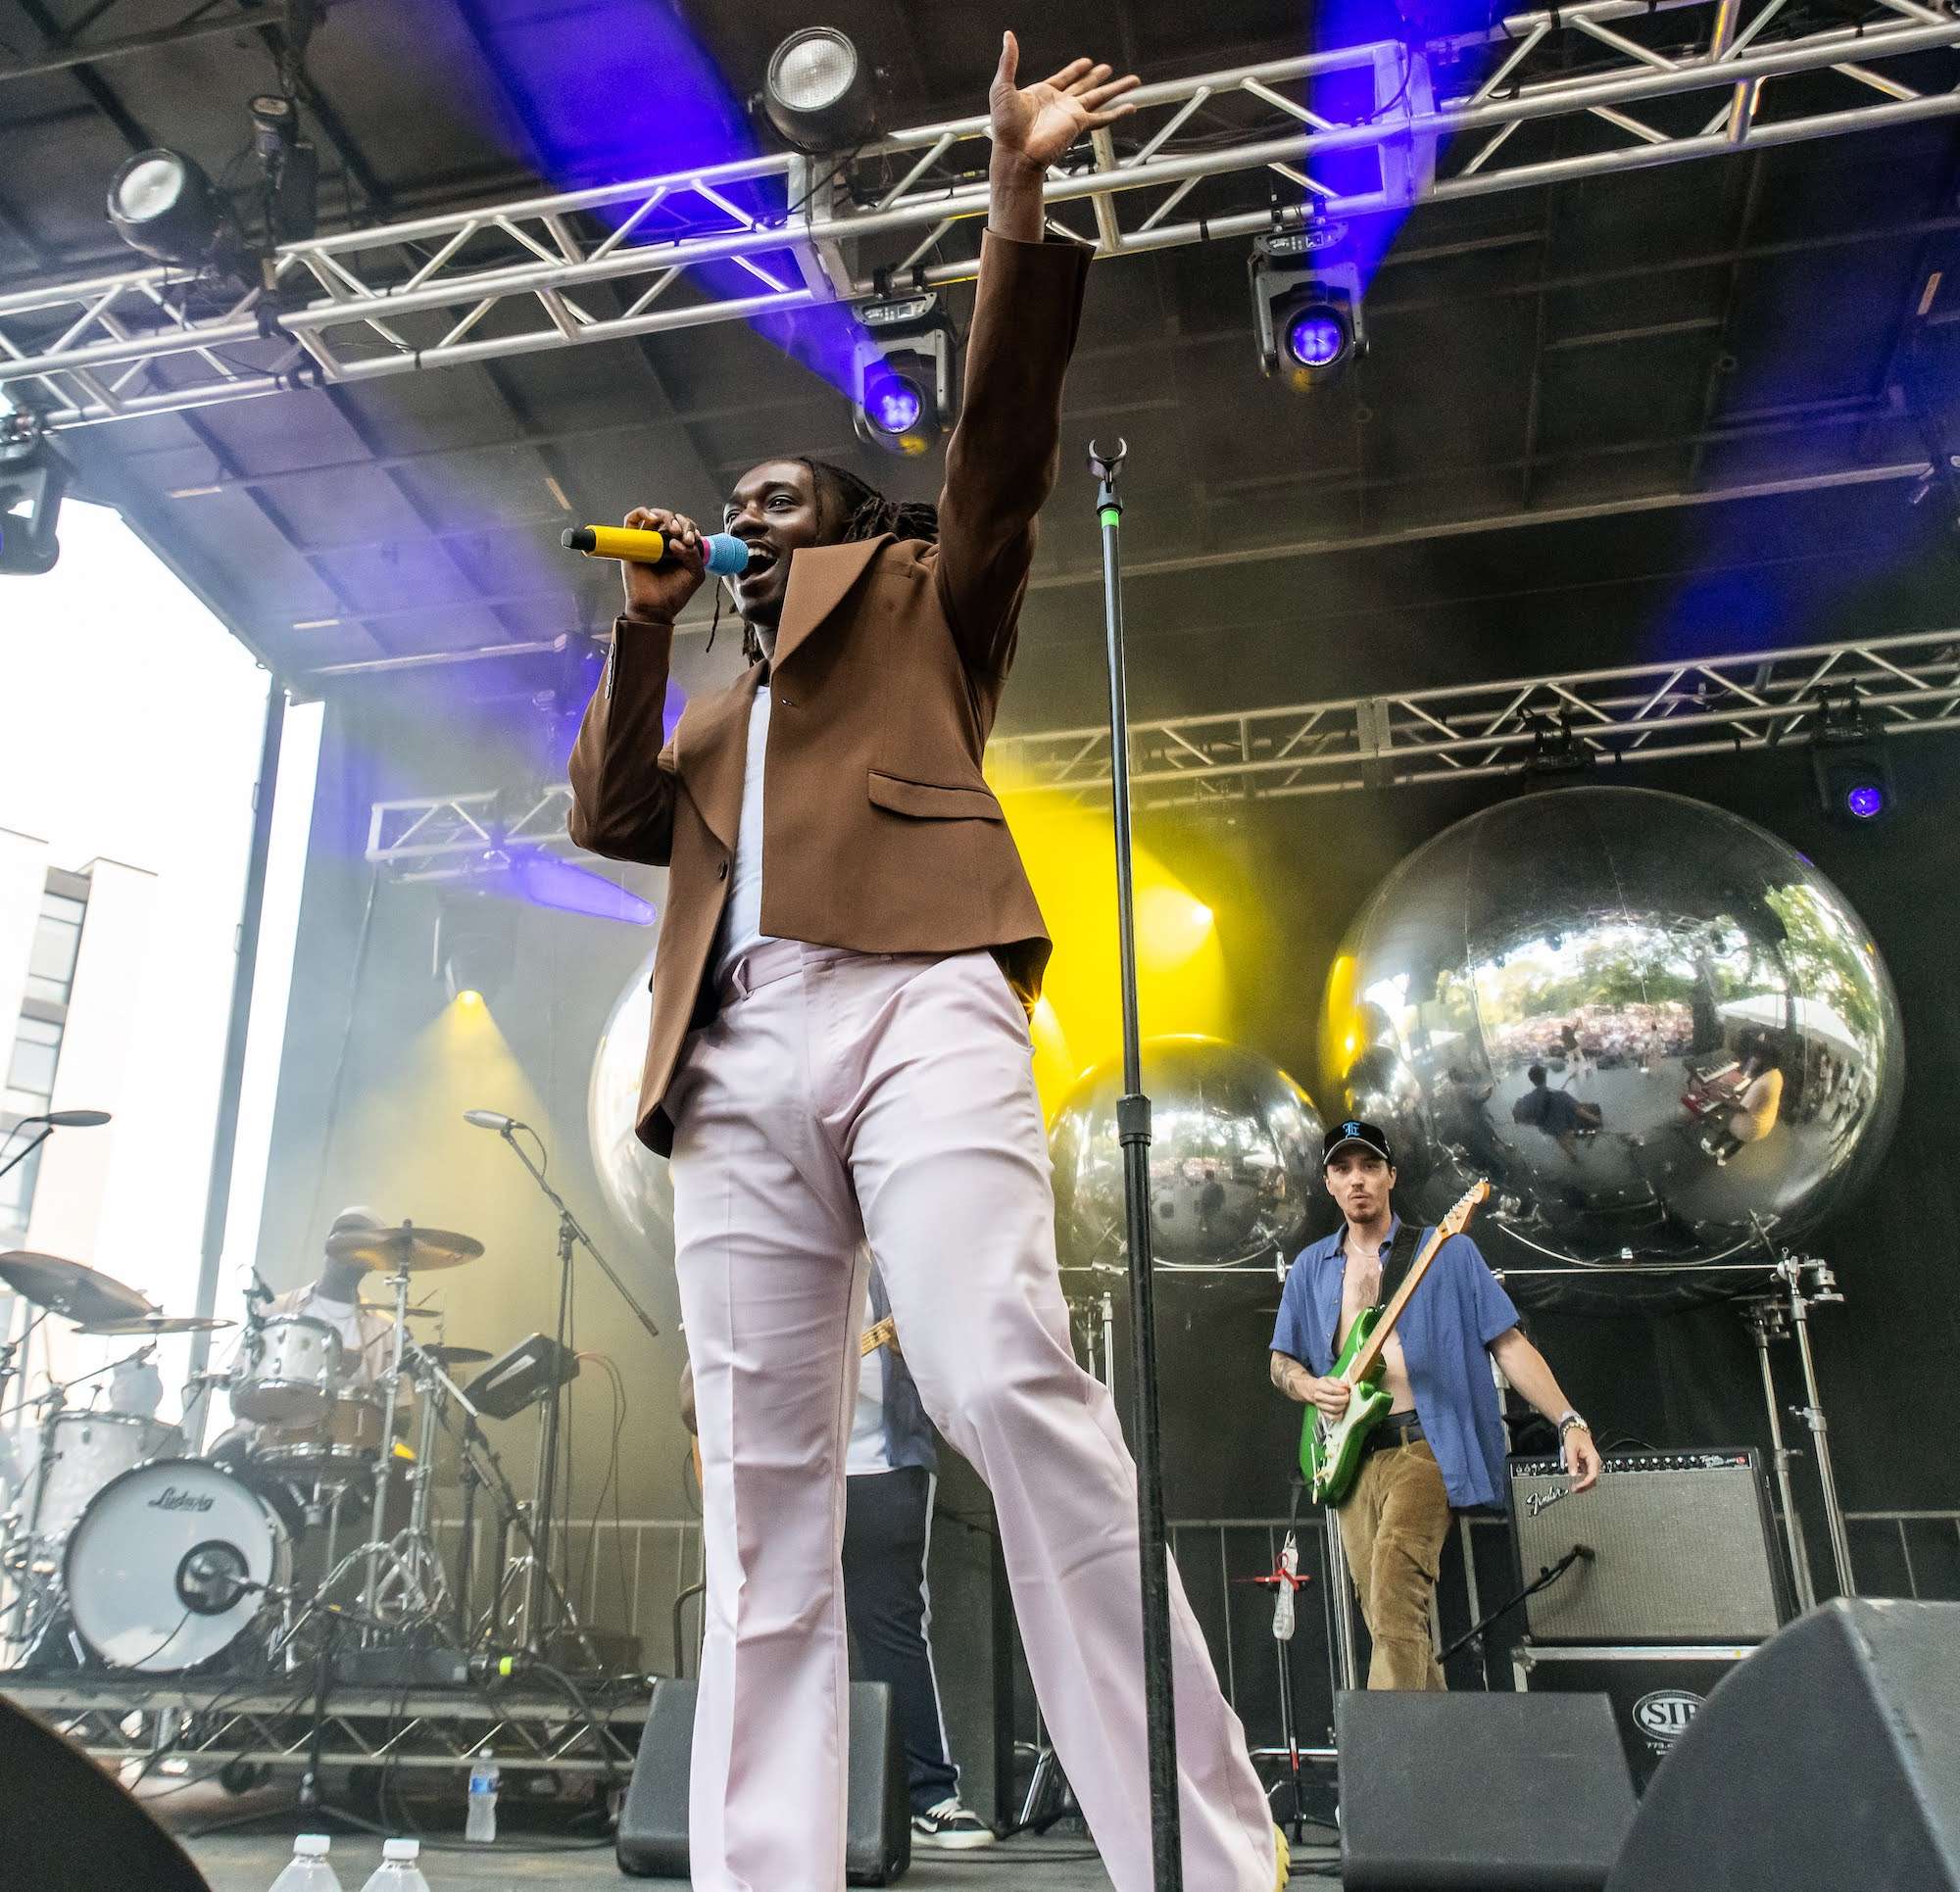 Ric Wilson Live At Pitchfork [GALLERY] 1